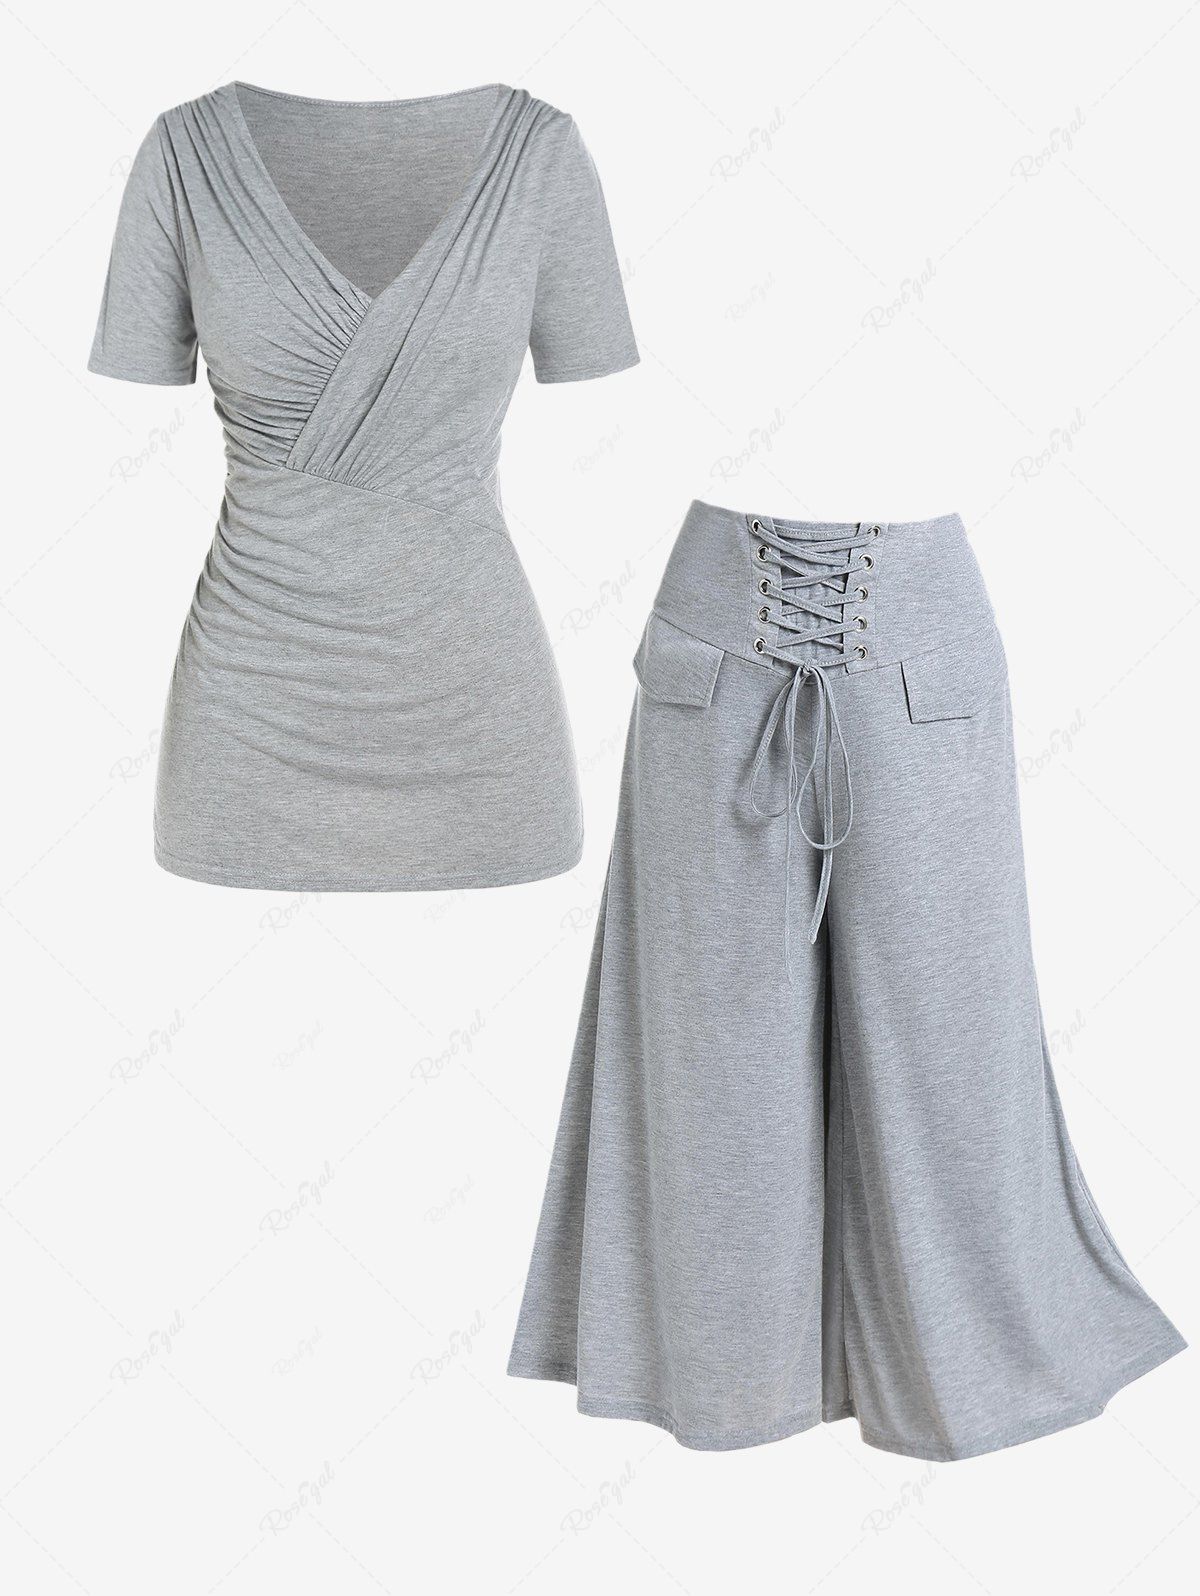 Fancy Ultimate Gray Ruched Surplice Tee and Lace Up Wide Leg Ninth Pants Plus Size Outfit  